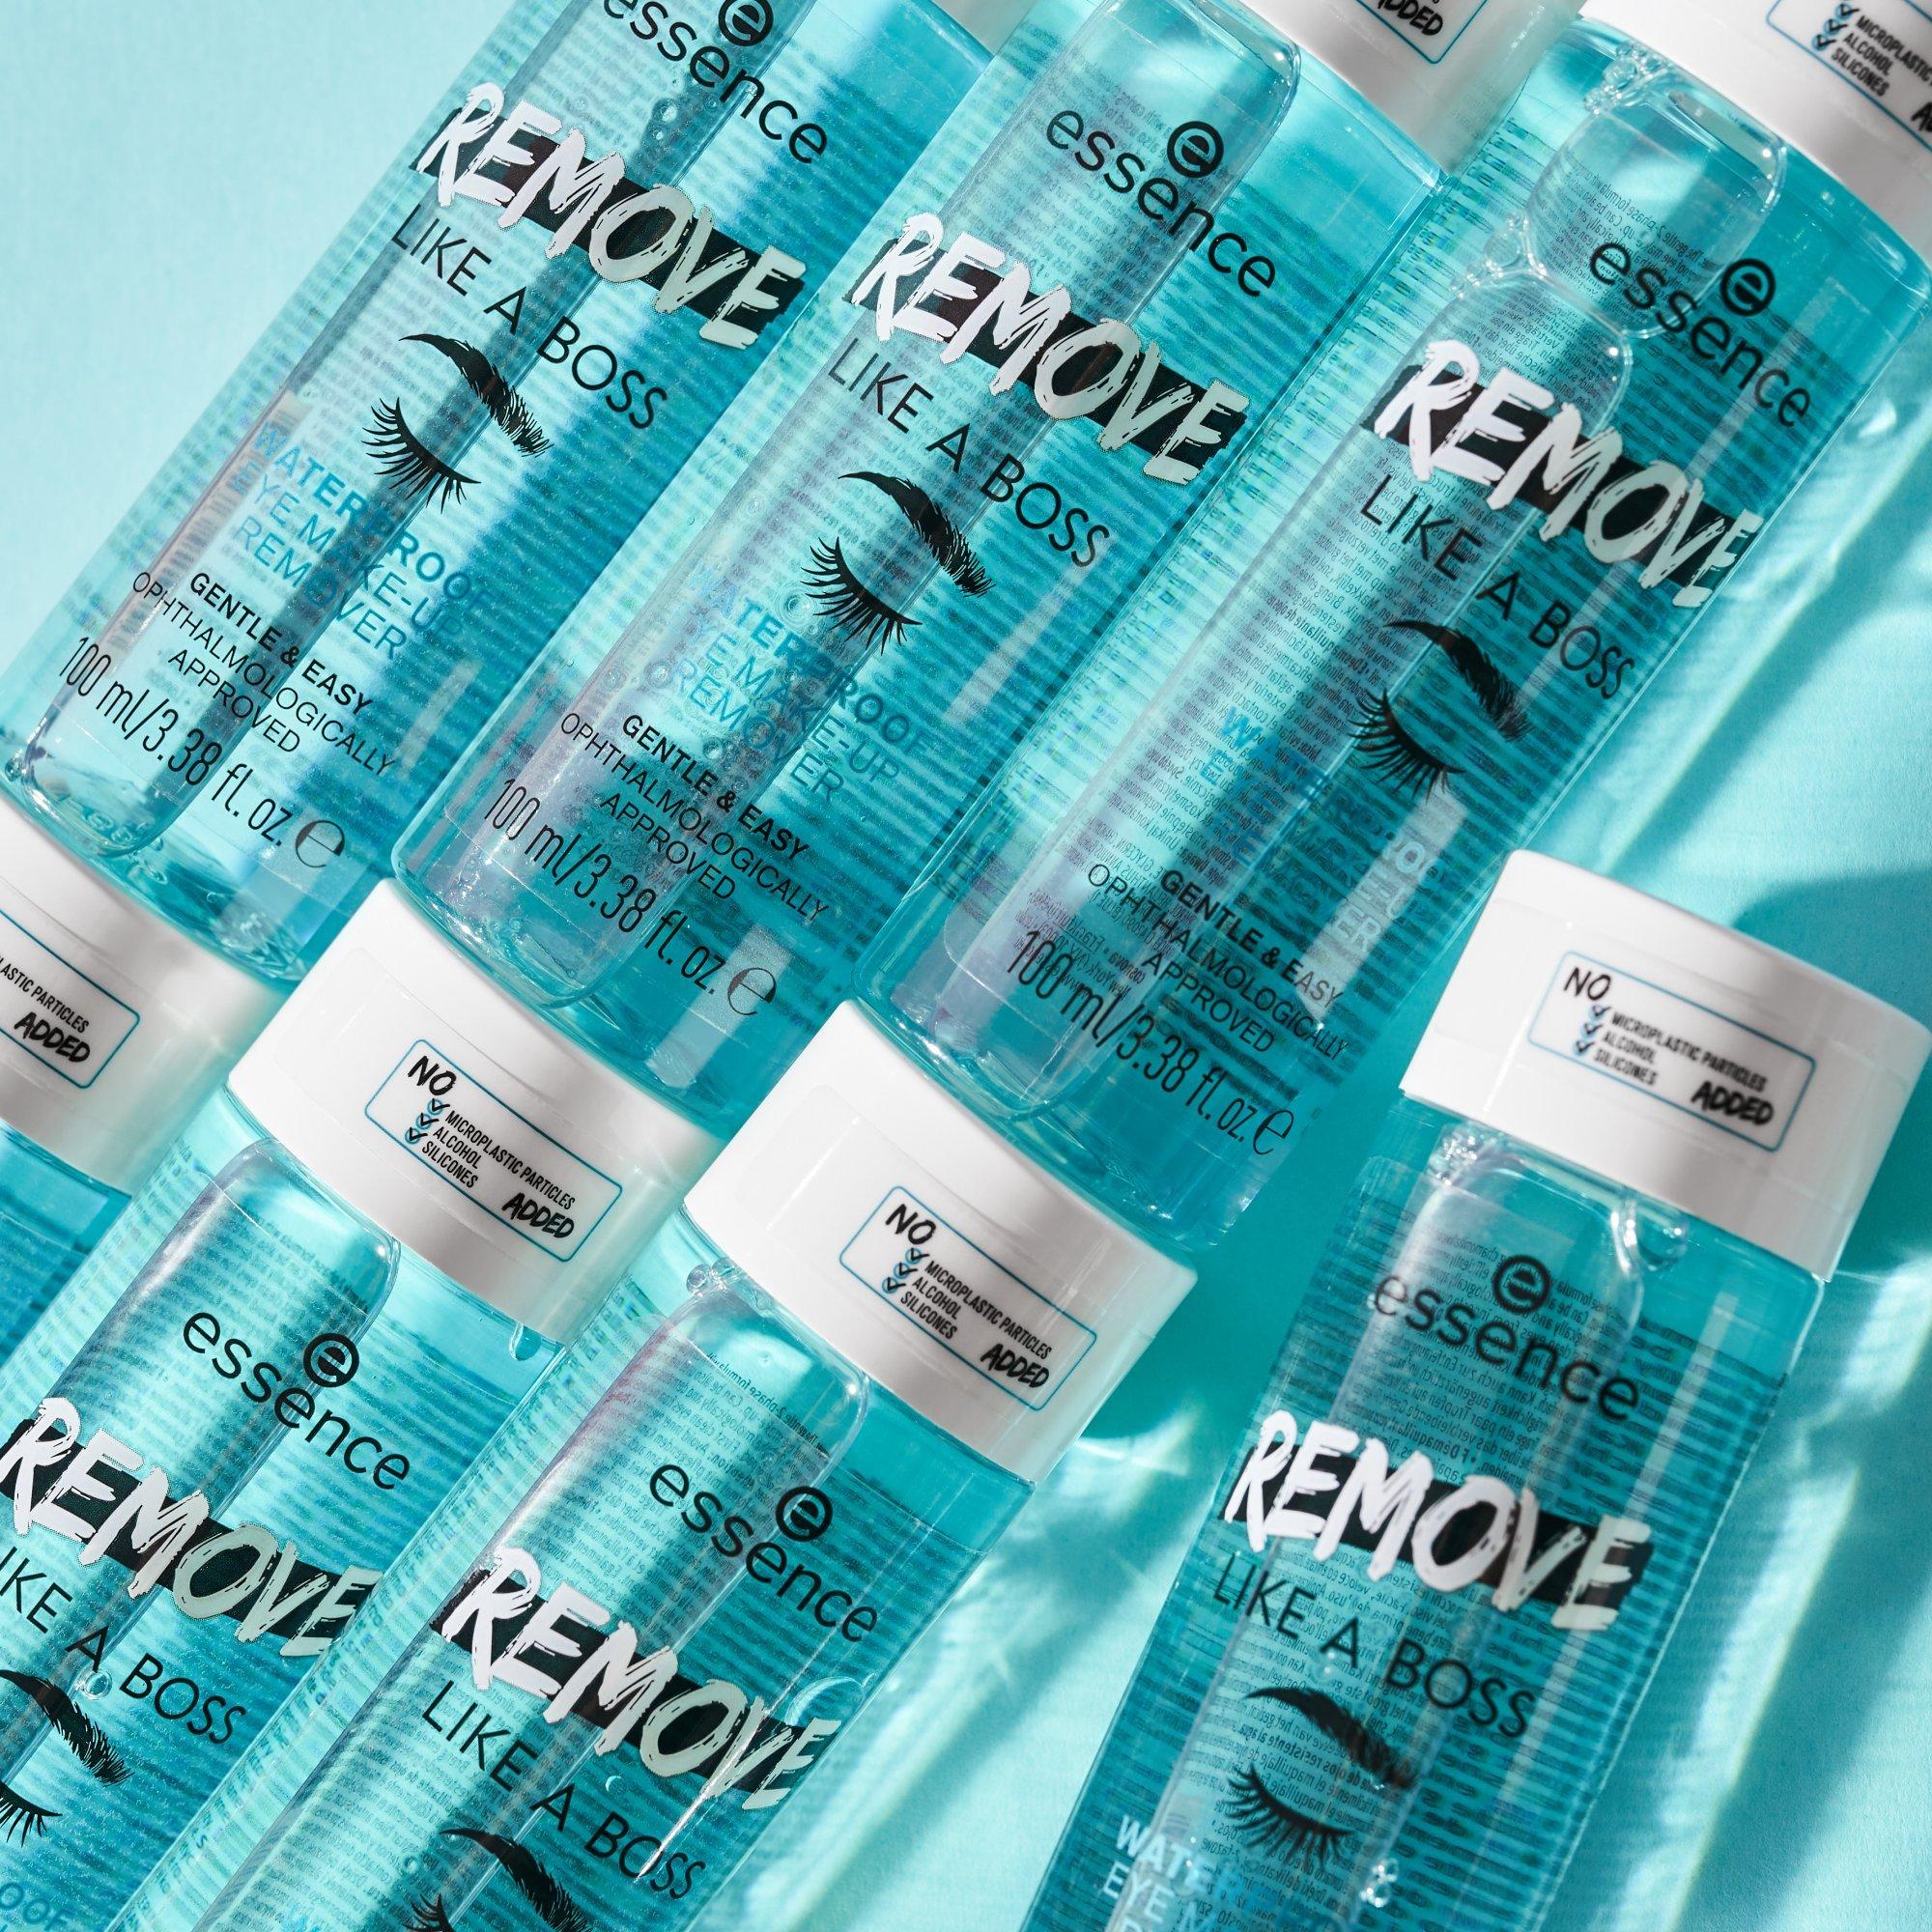 REMOVE LIKE A BOSS WATERPROOF EYE MAKE-UP REMOVER démaquillant